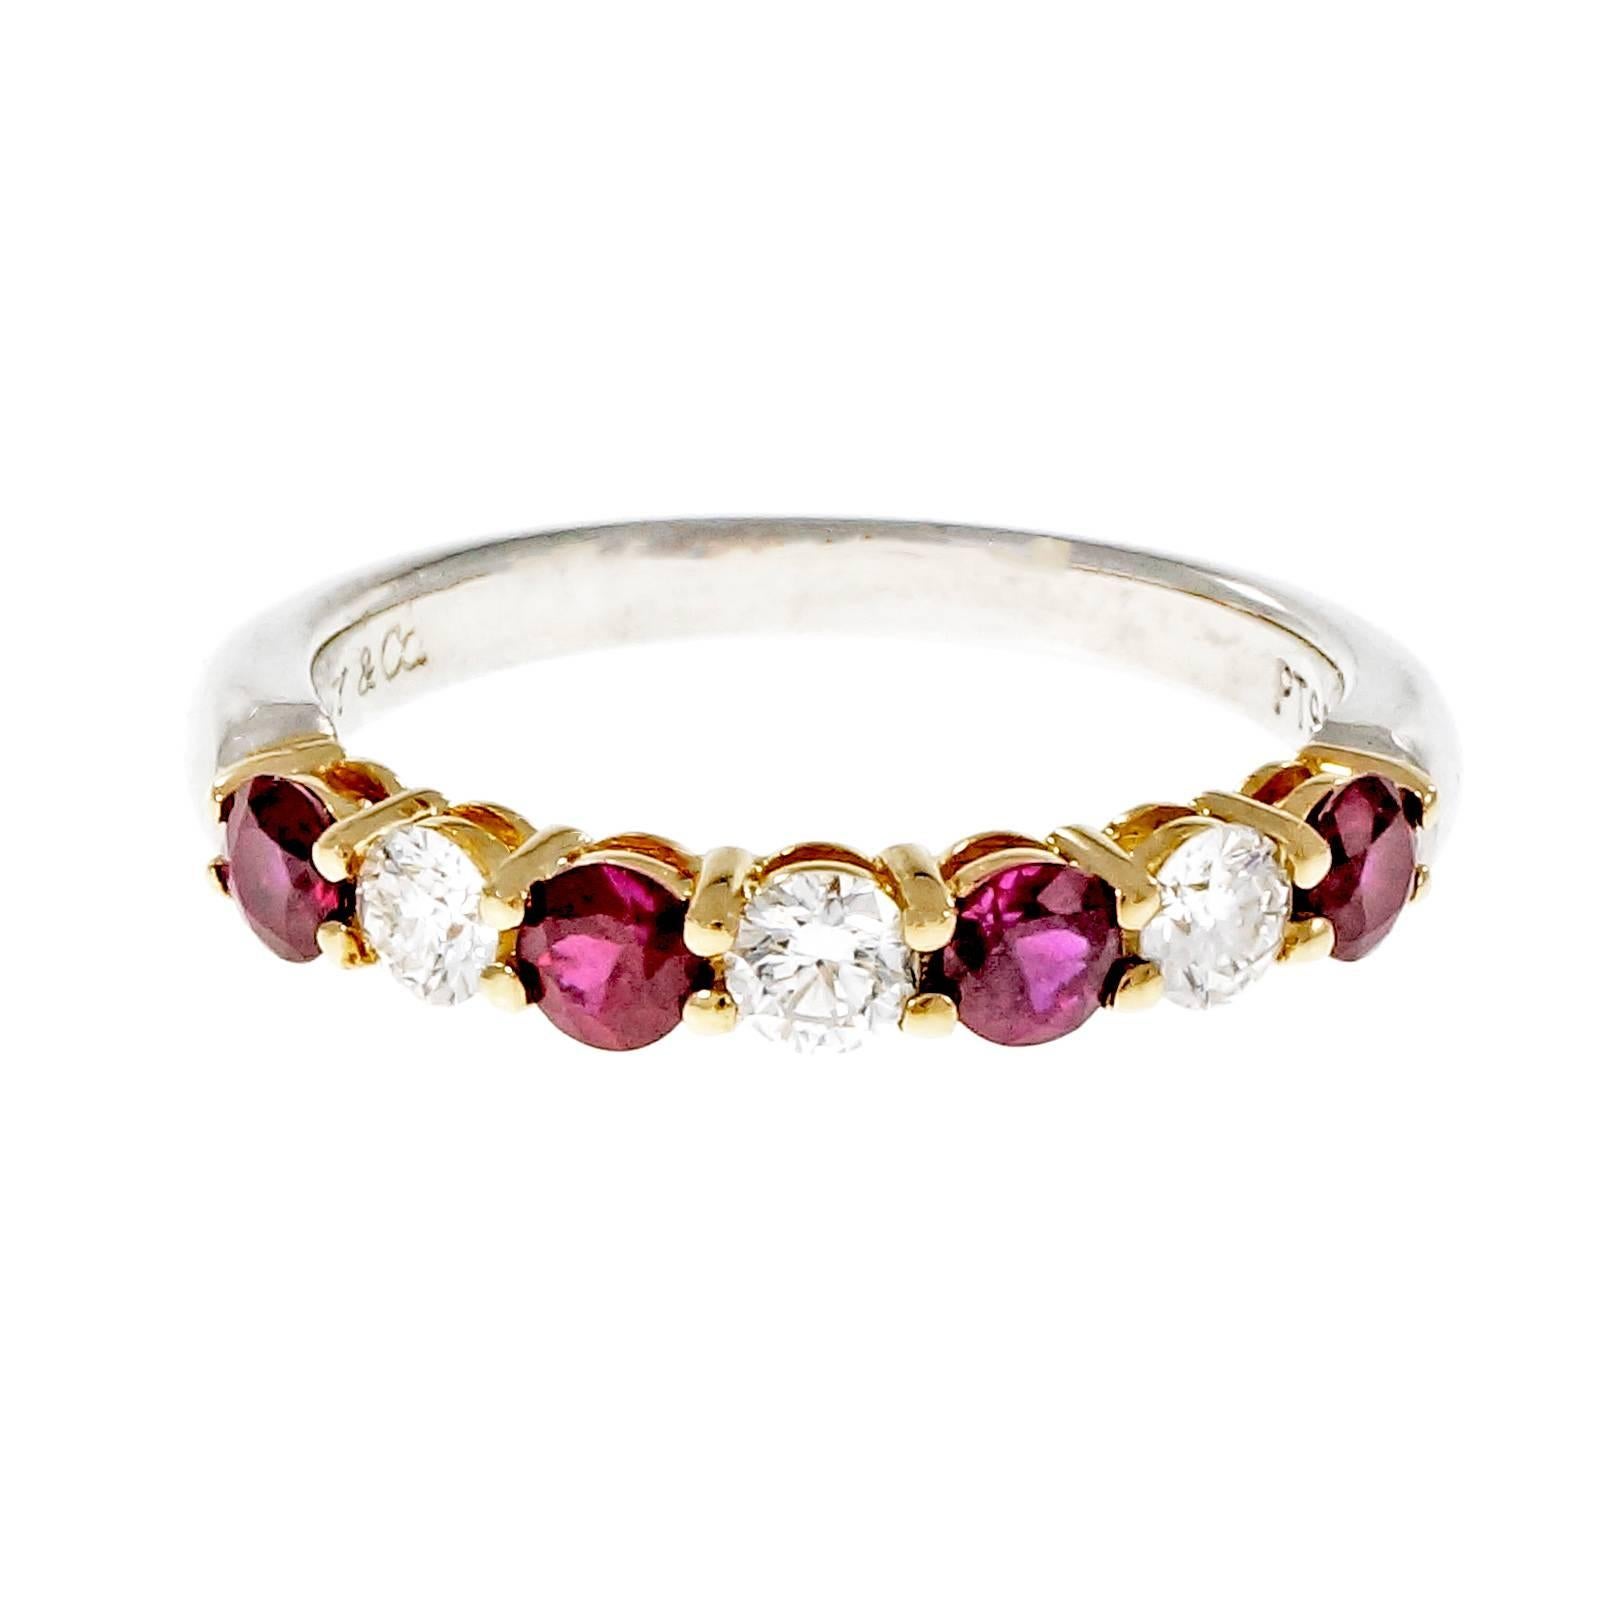 Tiffany & Co common prong wedding band ring with rubies and diamonds. 

4 round bright red Rubies, approx. total weight .50cts, VS, 2.65mm
3 round Ideal full cut diamonds, approx. total weight .24cts, F, VS
Platinum & 18k yellow gold
Tested: